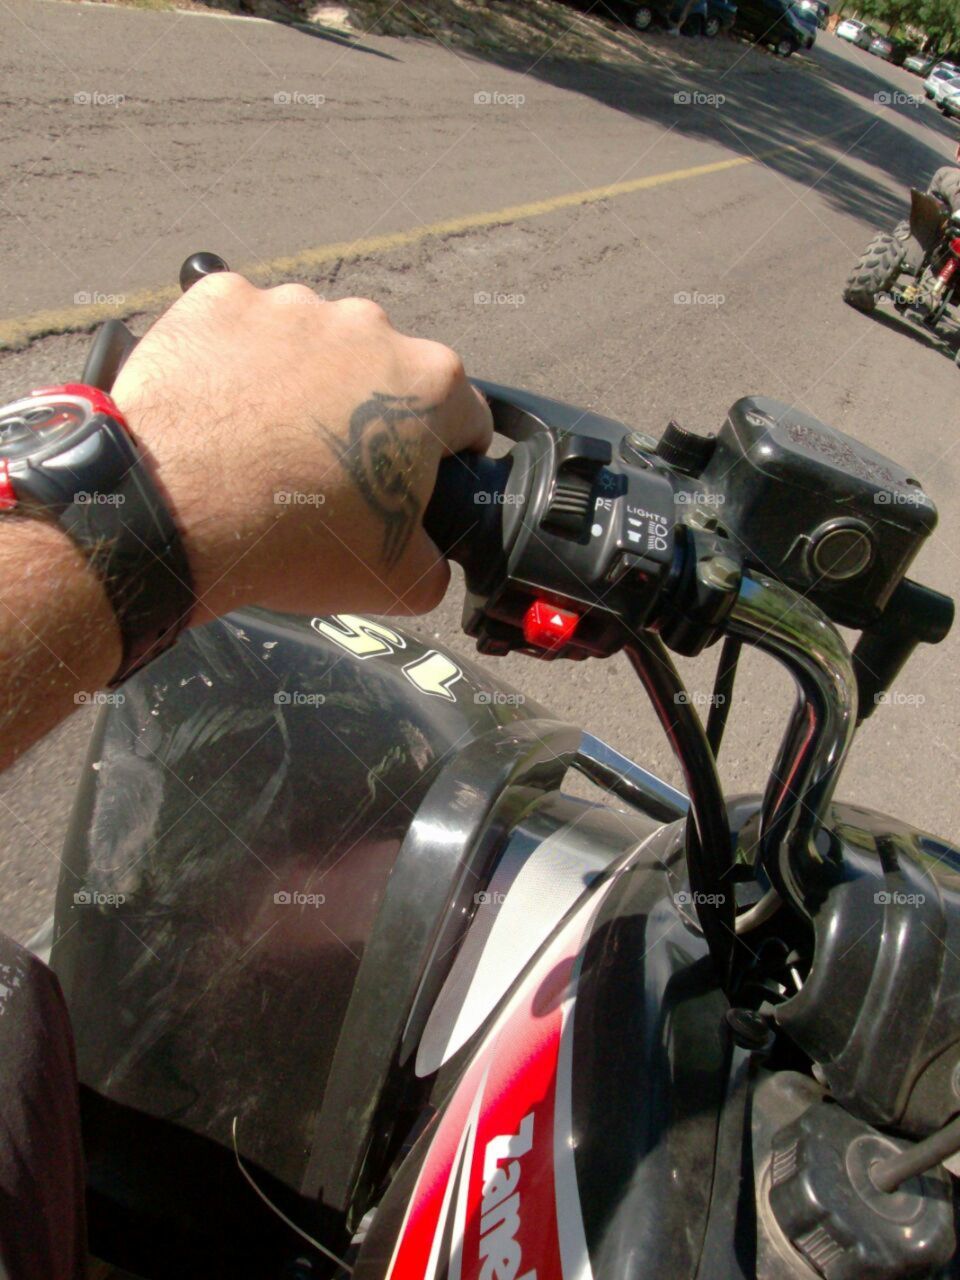 Driving a quad bike. The driver's hand is observed.